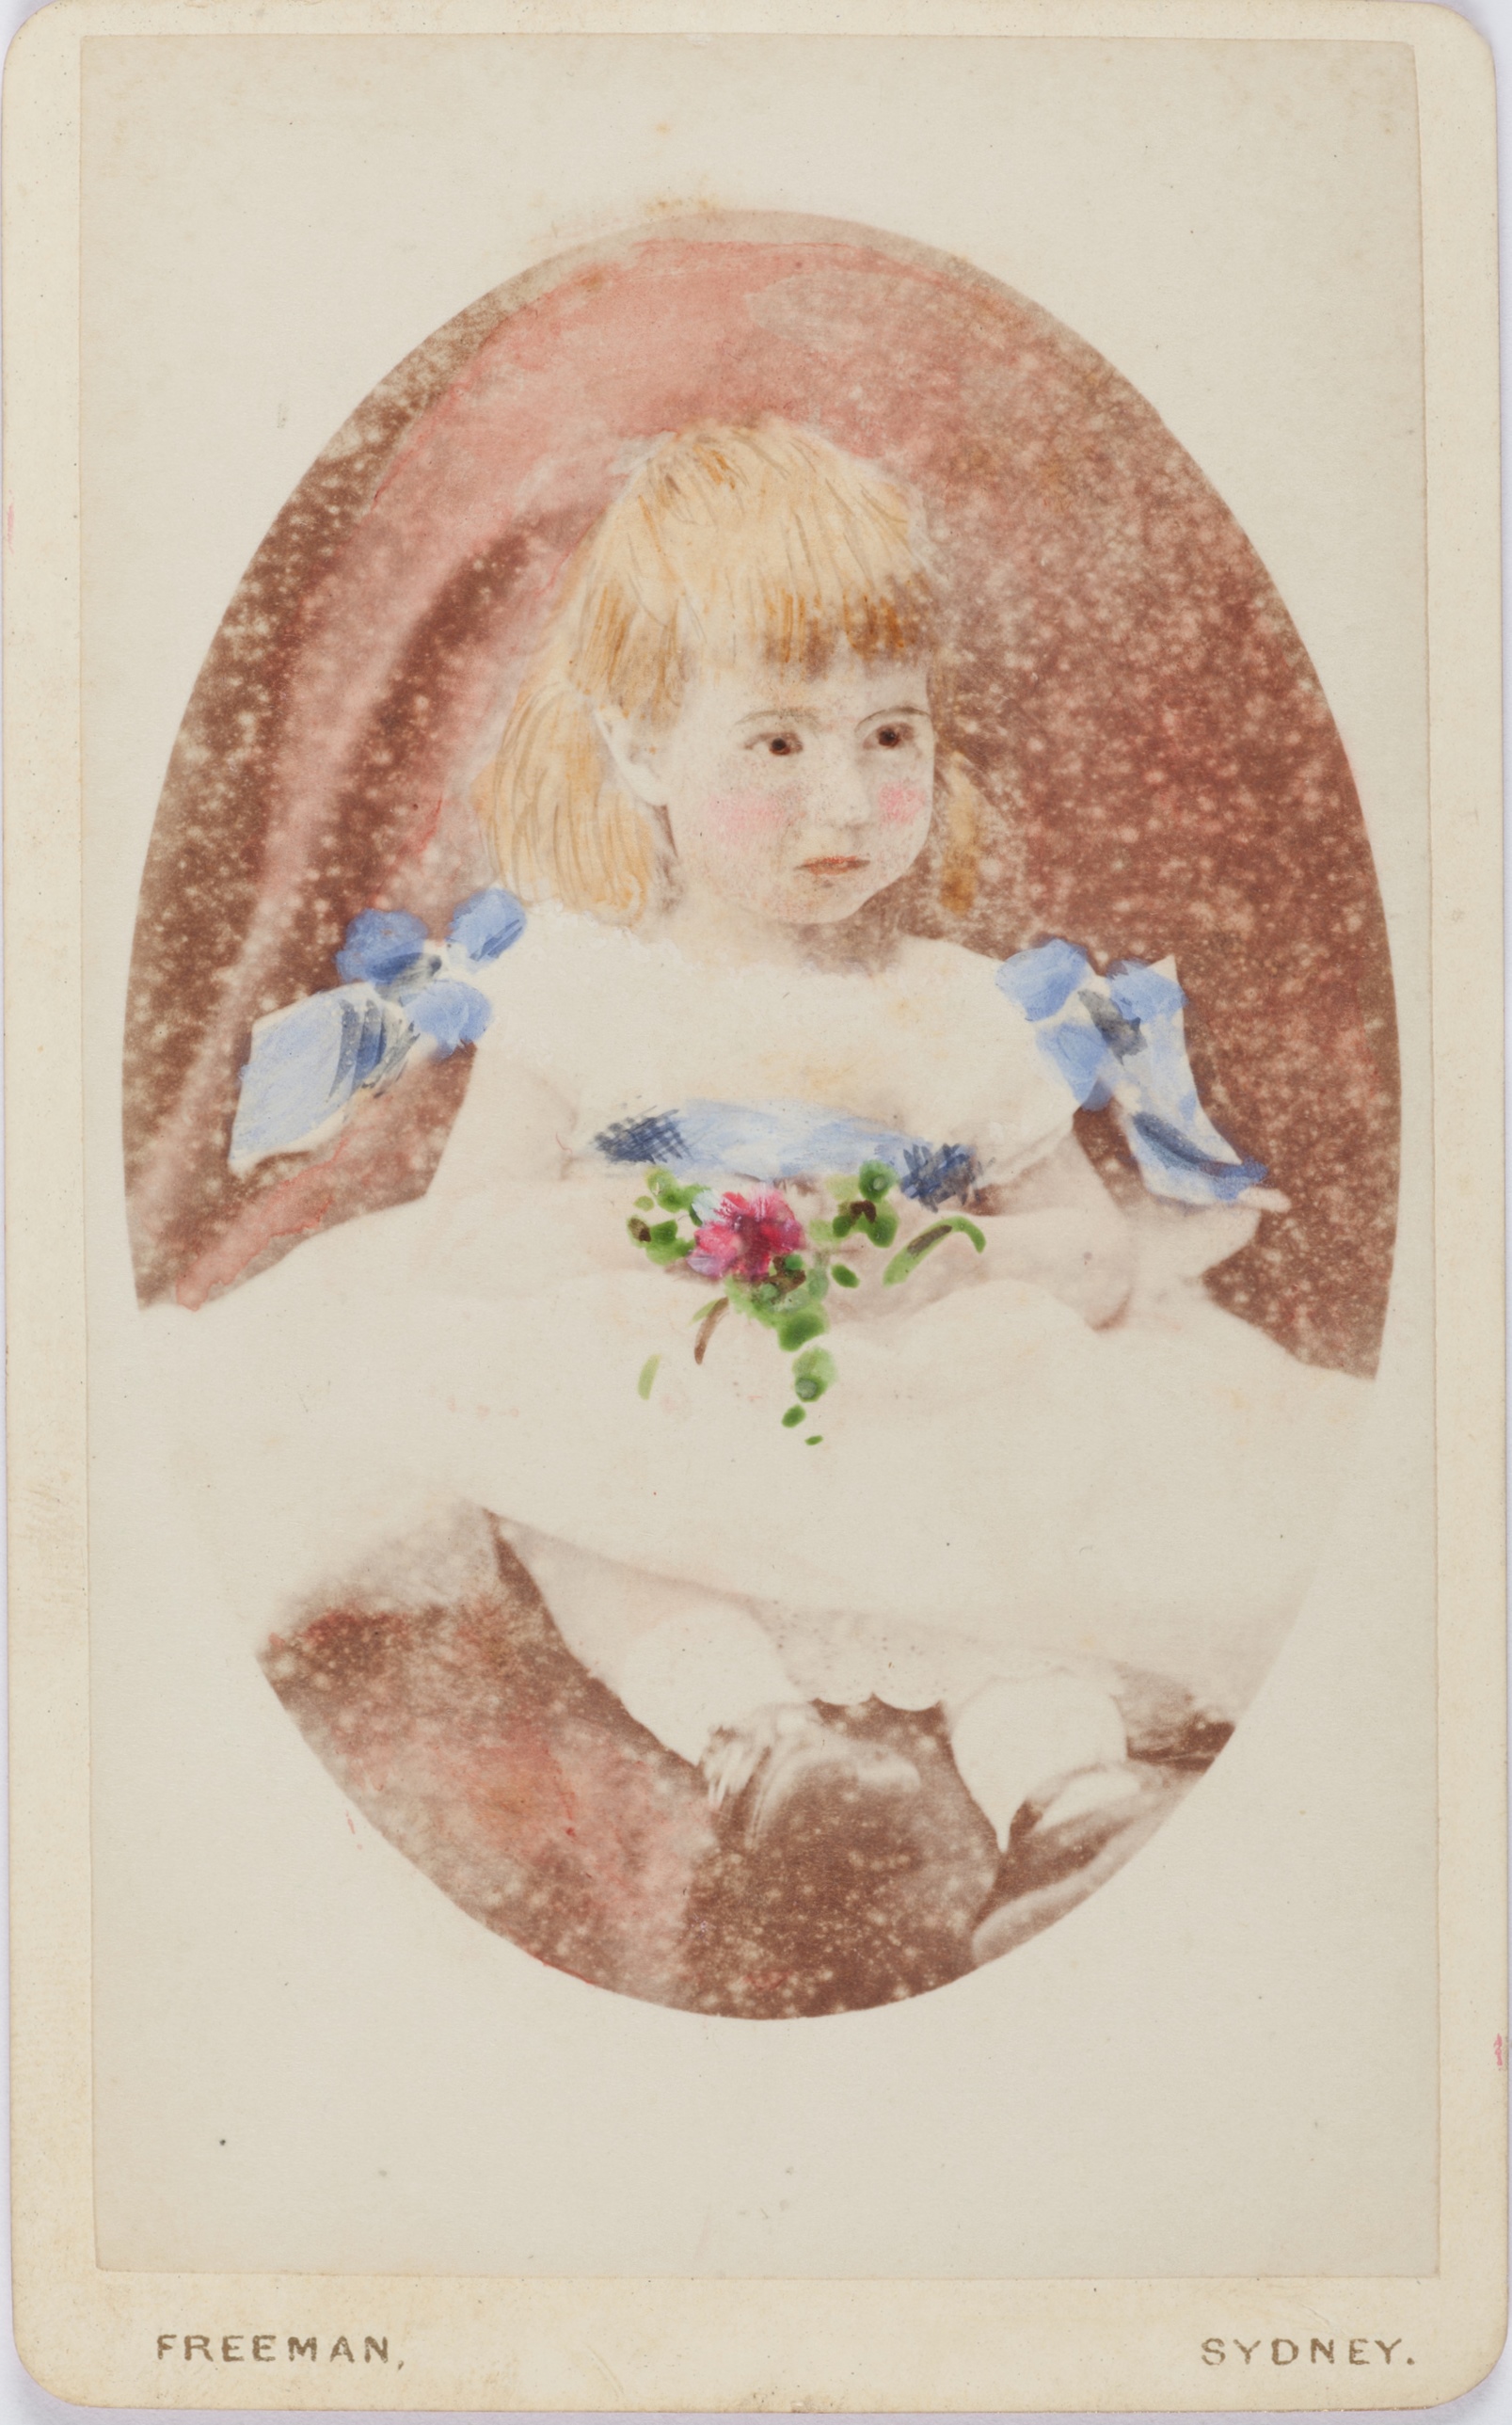 Hand coloured carte-de-visite photograph of Nina Beatrice Rouse as a young child, around 1876 / Freeman